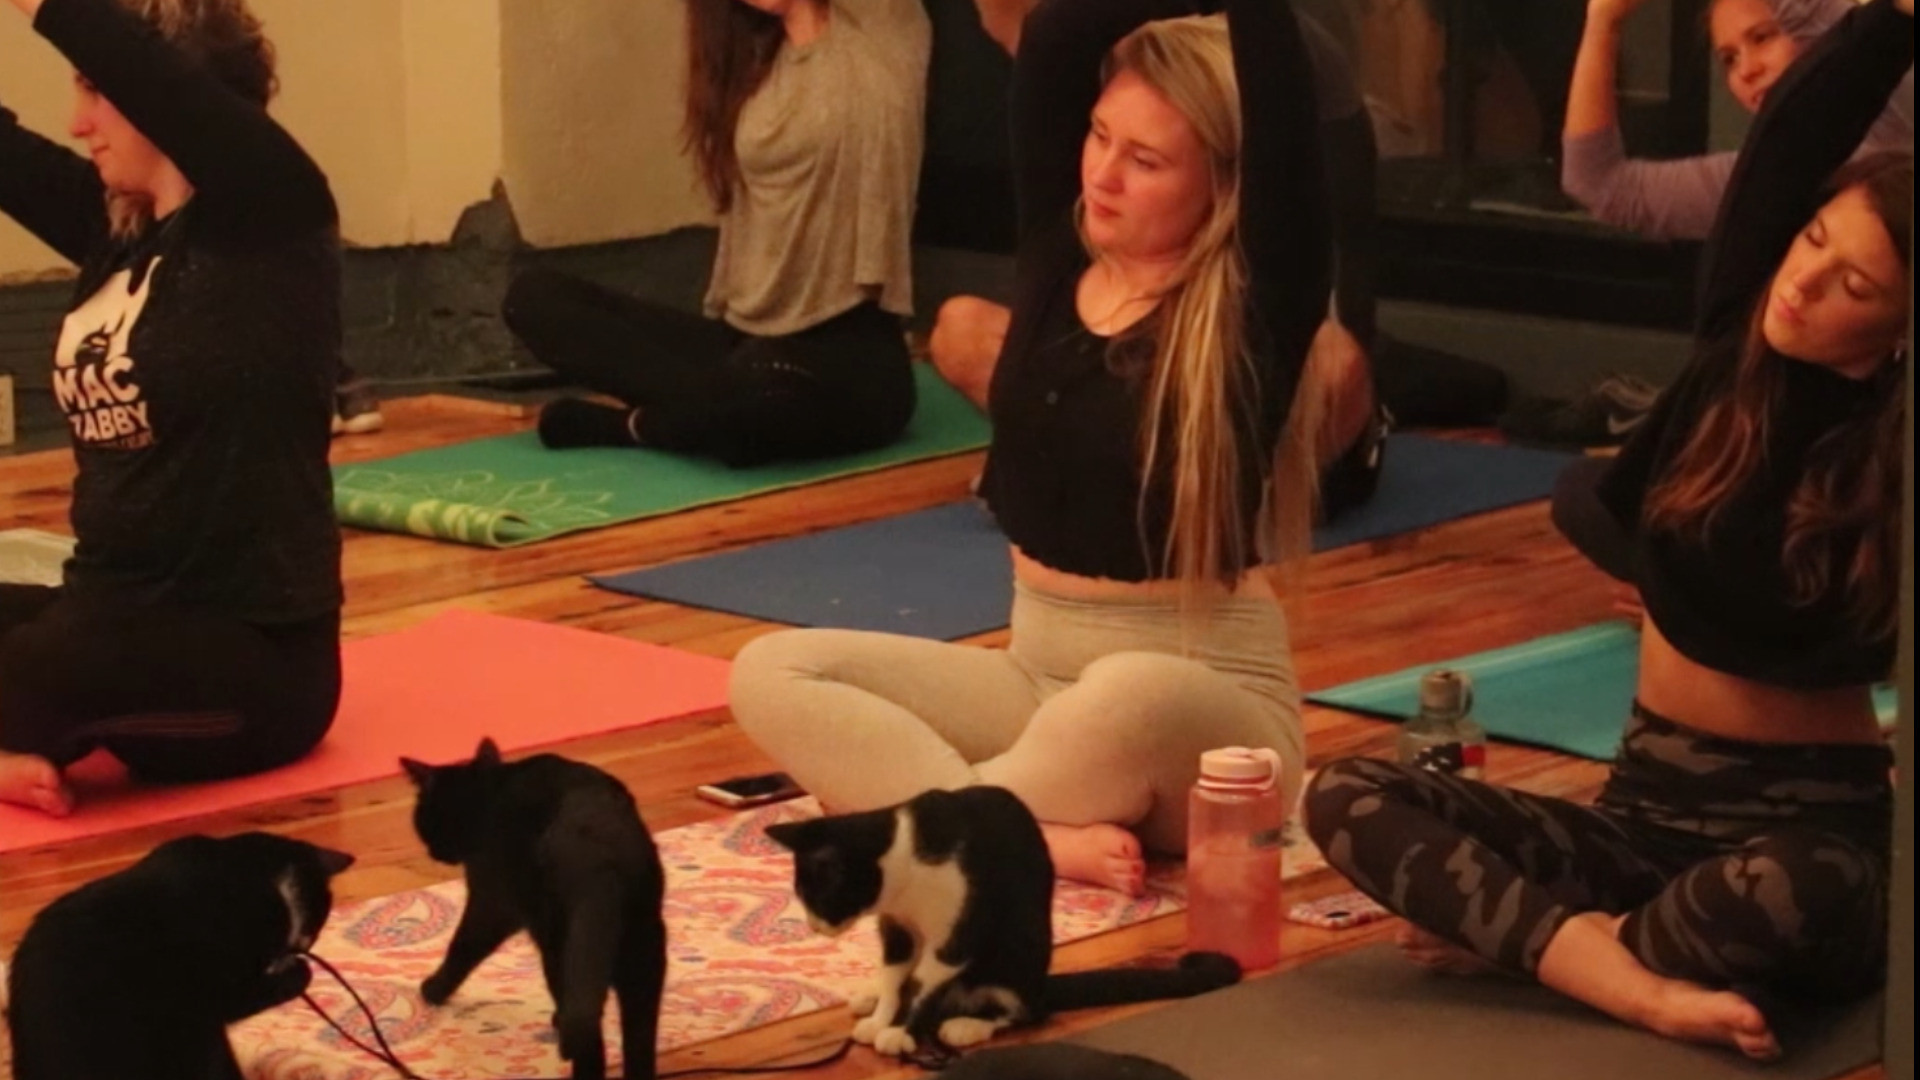 Every Monday, cat lovers and newcomers alike gather to stretch, relax and play with cats. The instructor described the class as a good beginner class.